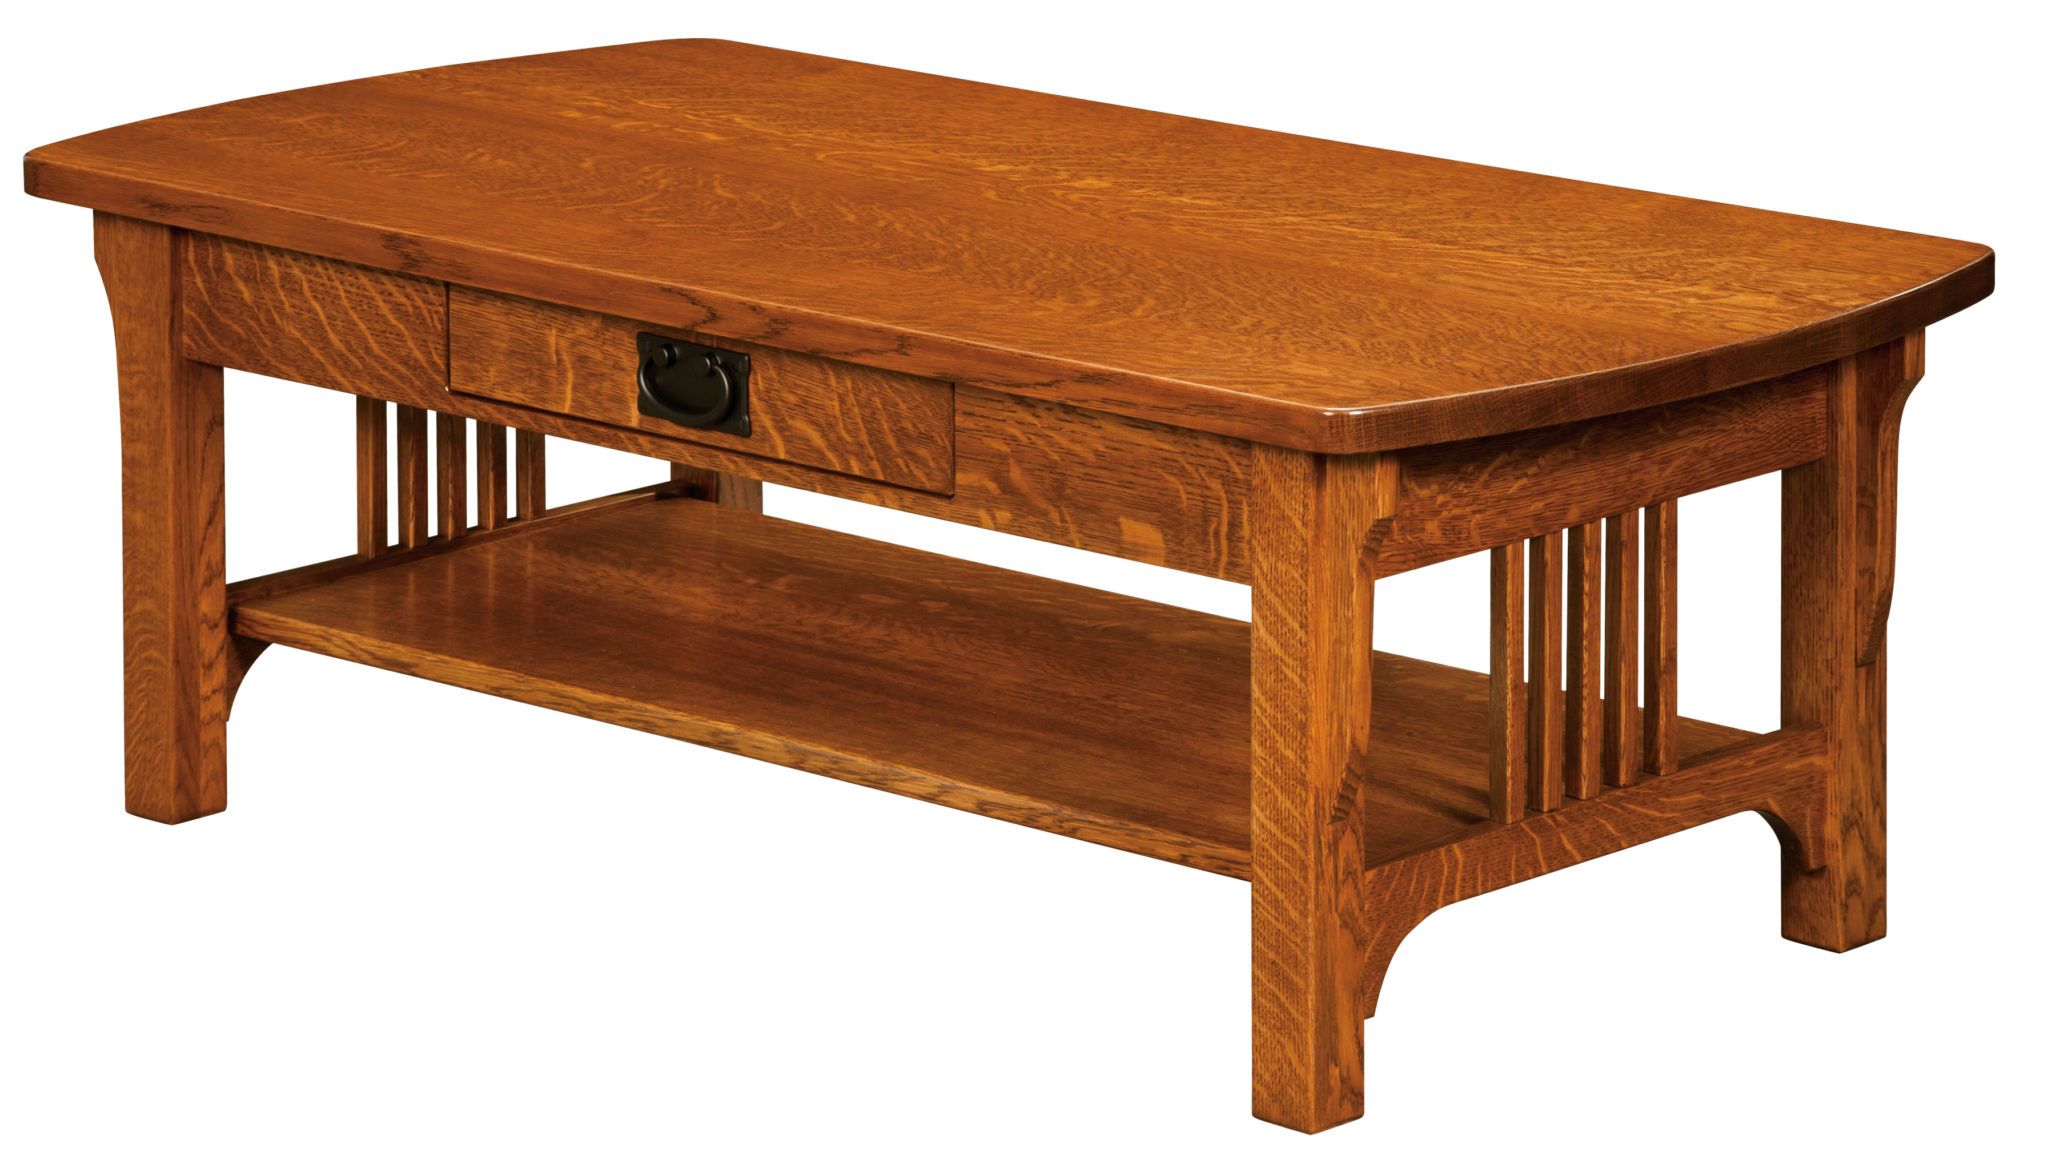 Craftsman Mission Coffee Table | Amish Solid Wood Coffee Tables Within Pemberly Row Replicated Wood Coffee Tables (View 17 of 20)